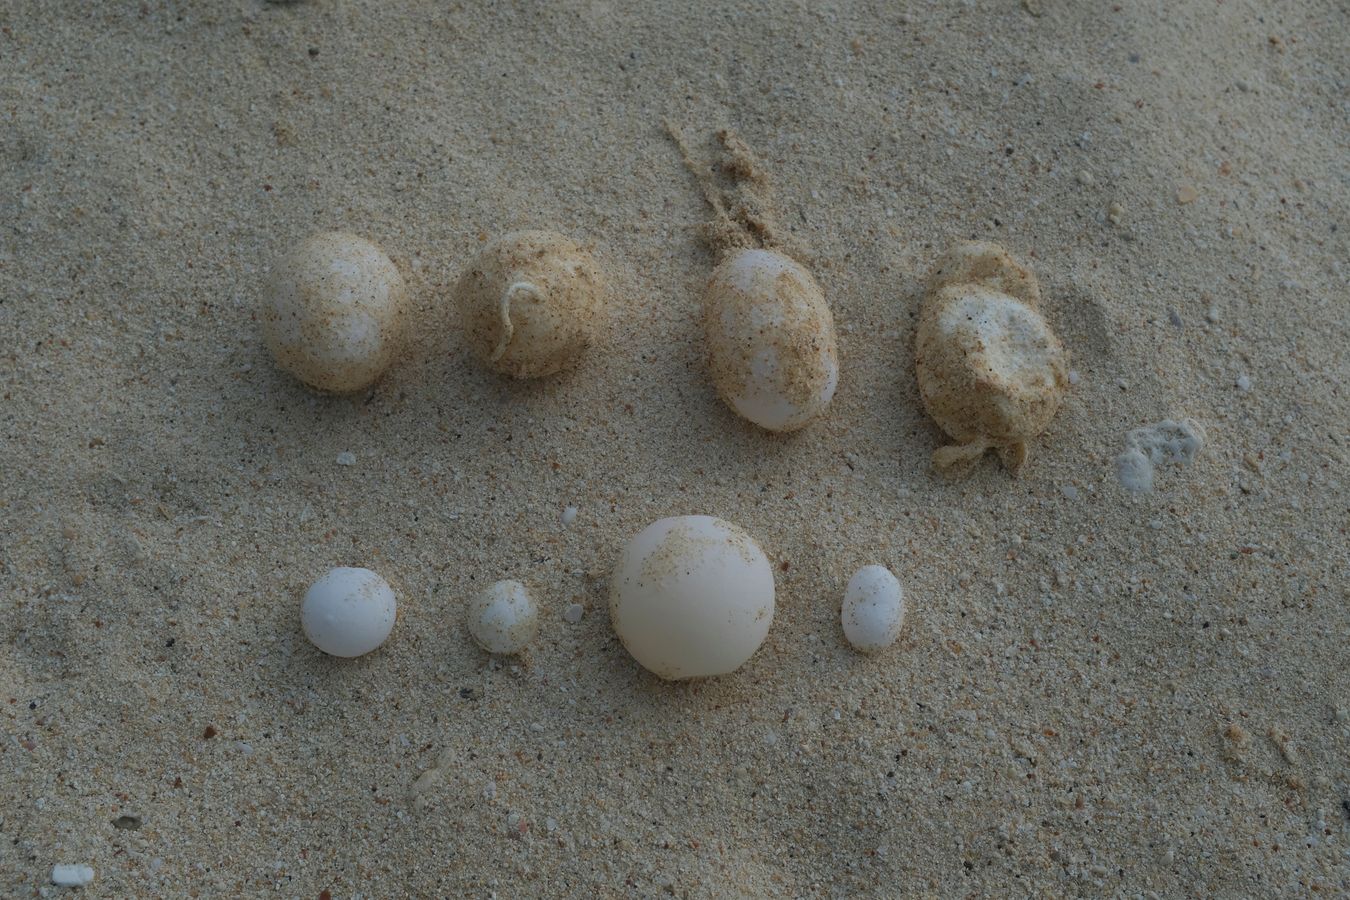 Different deformed green turtle eggs, only the first one on the left has the normal size, color and shape.